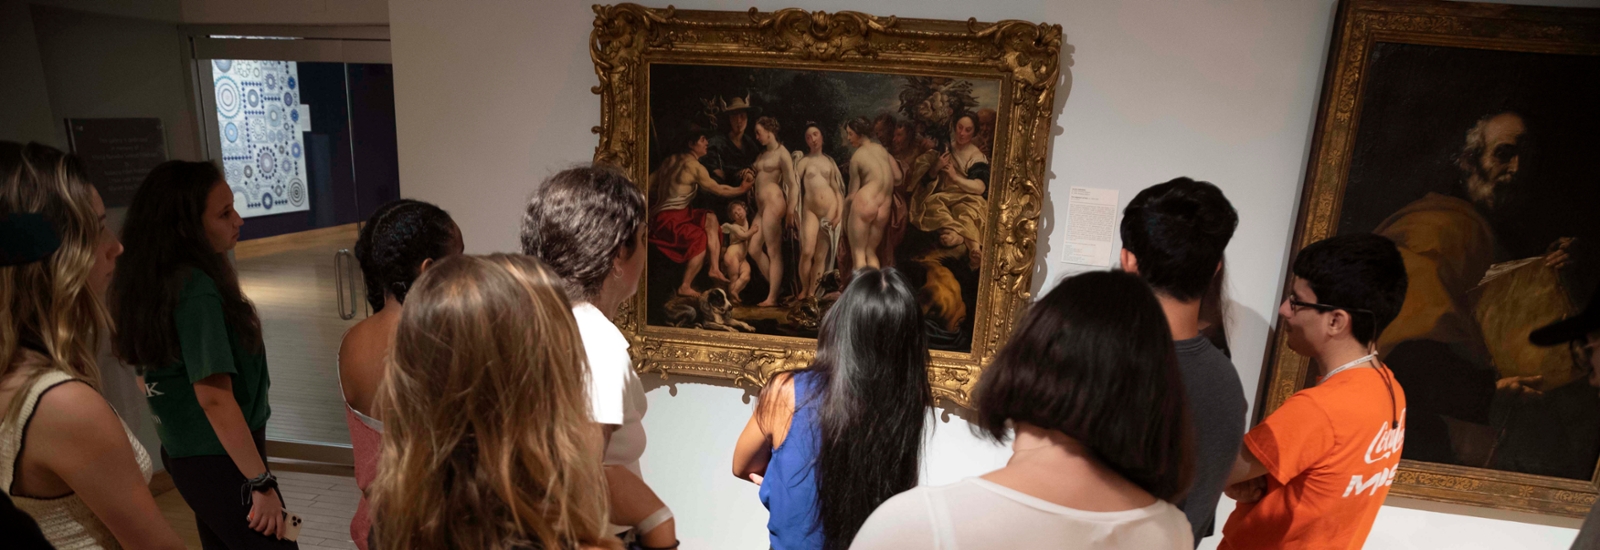 image of a group of students with their back to the viewer are looking at a painting done in classical style depicting the judgement of paris